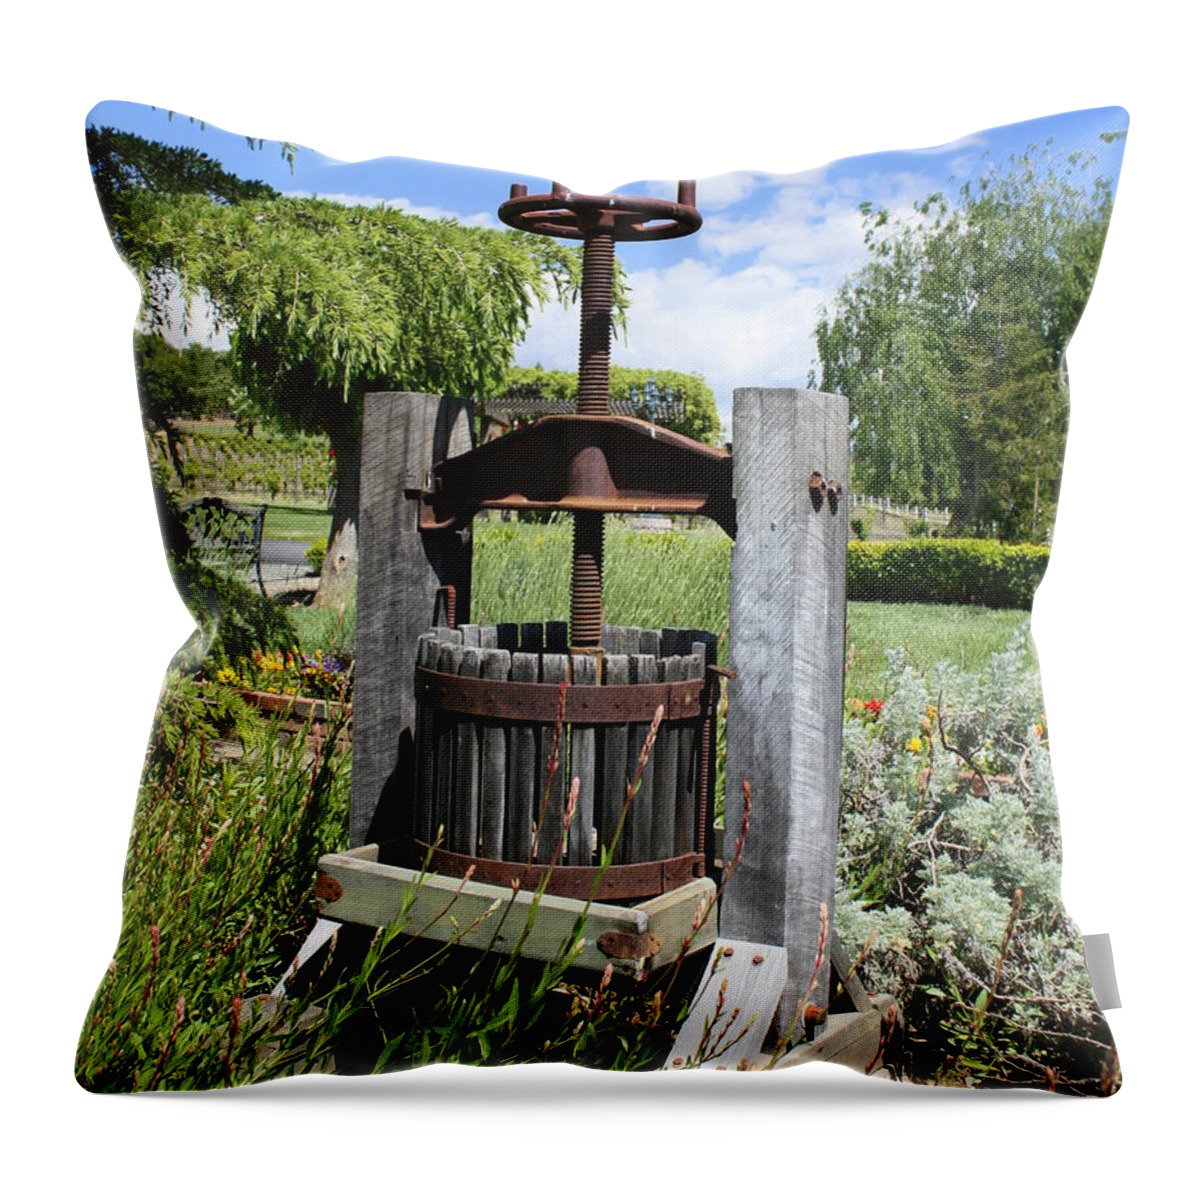 Make Grapes Whine Throw Pillow featuring the photograph Make Grapes Whine by Patrick Witz